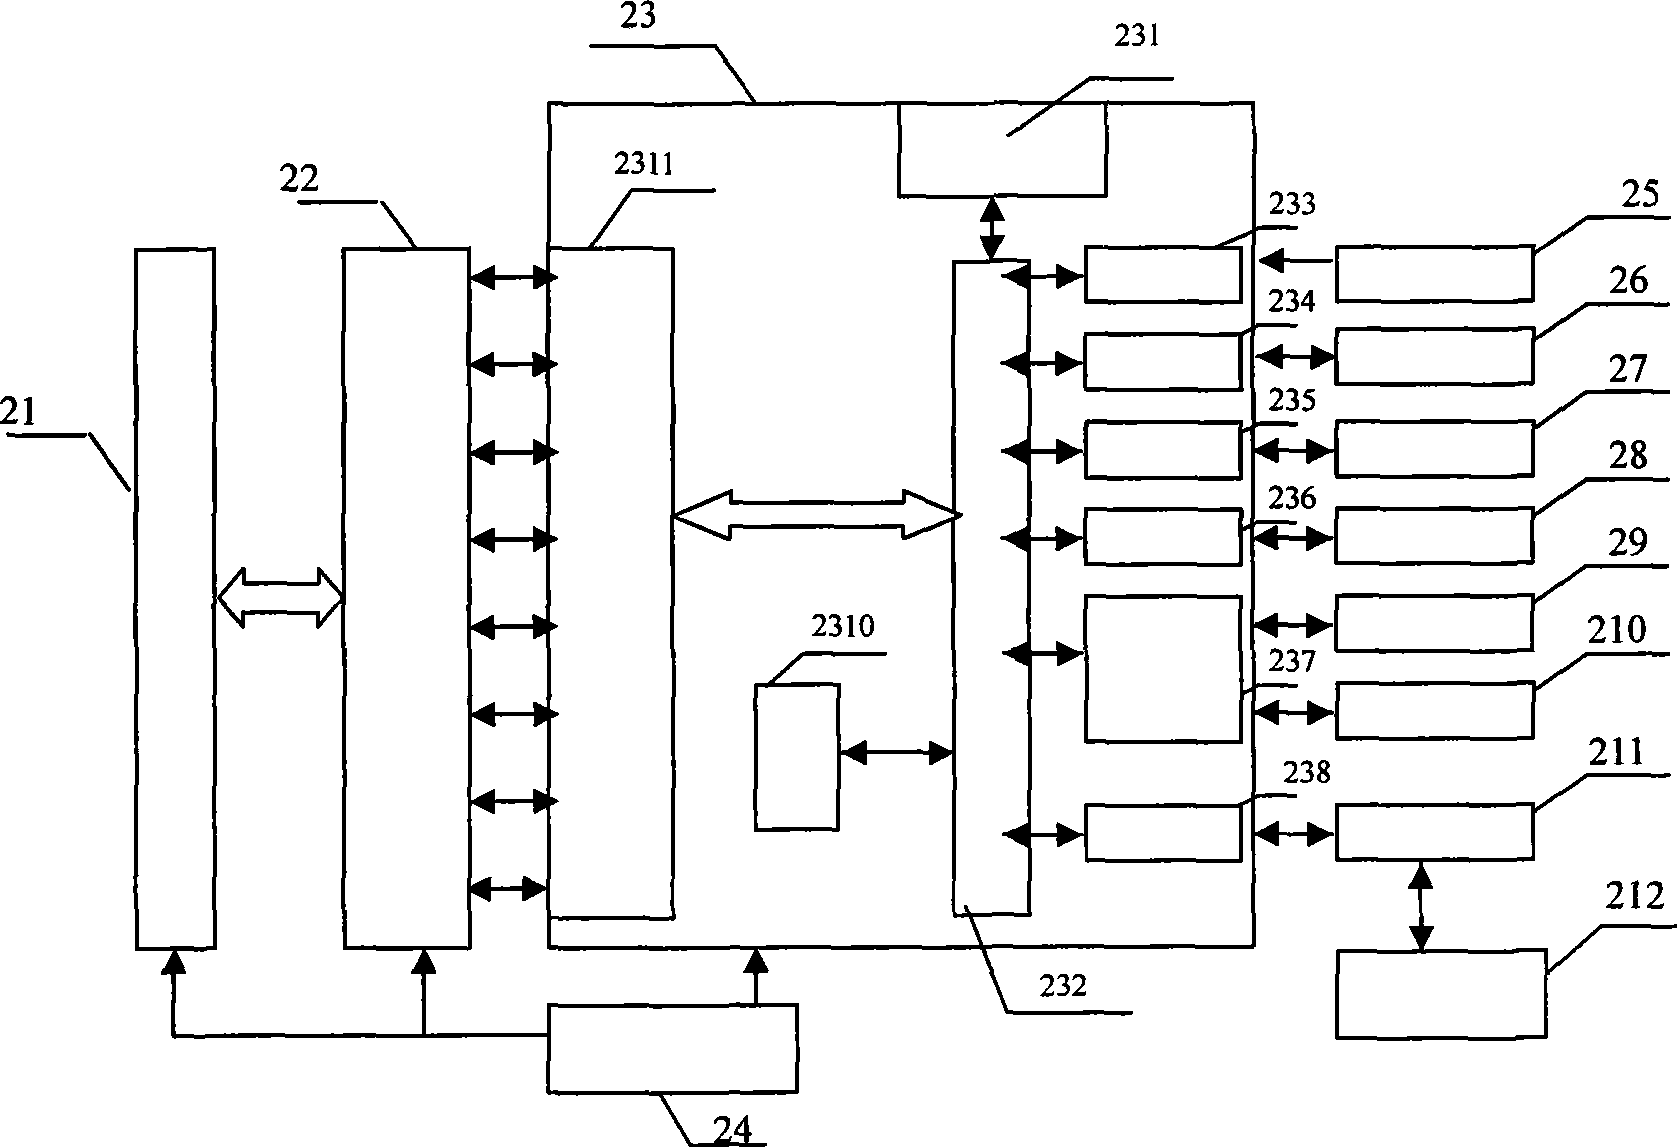 Multipath paralleling data acquisition system based on on-site programmable gate array